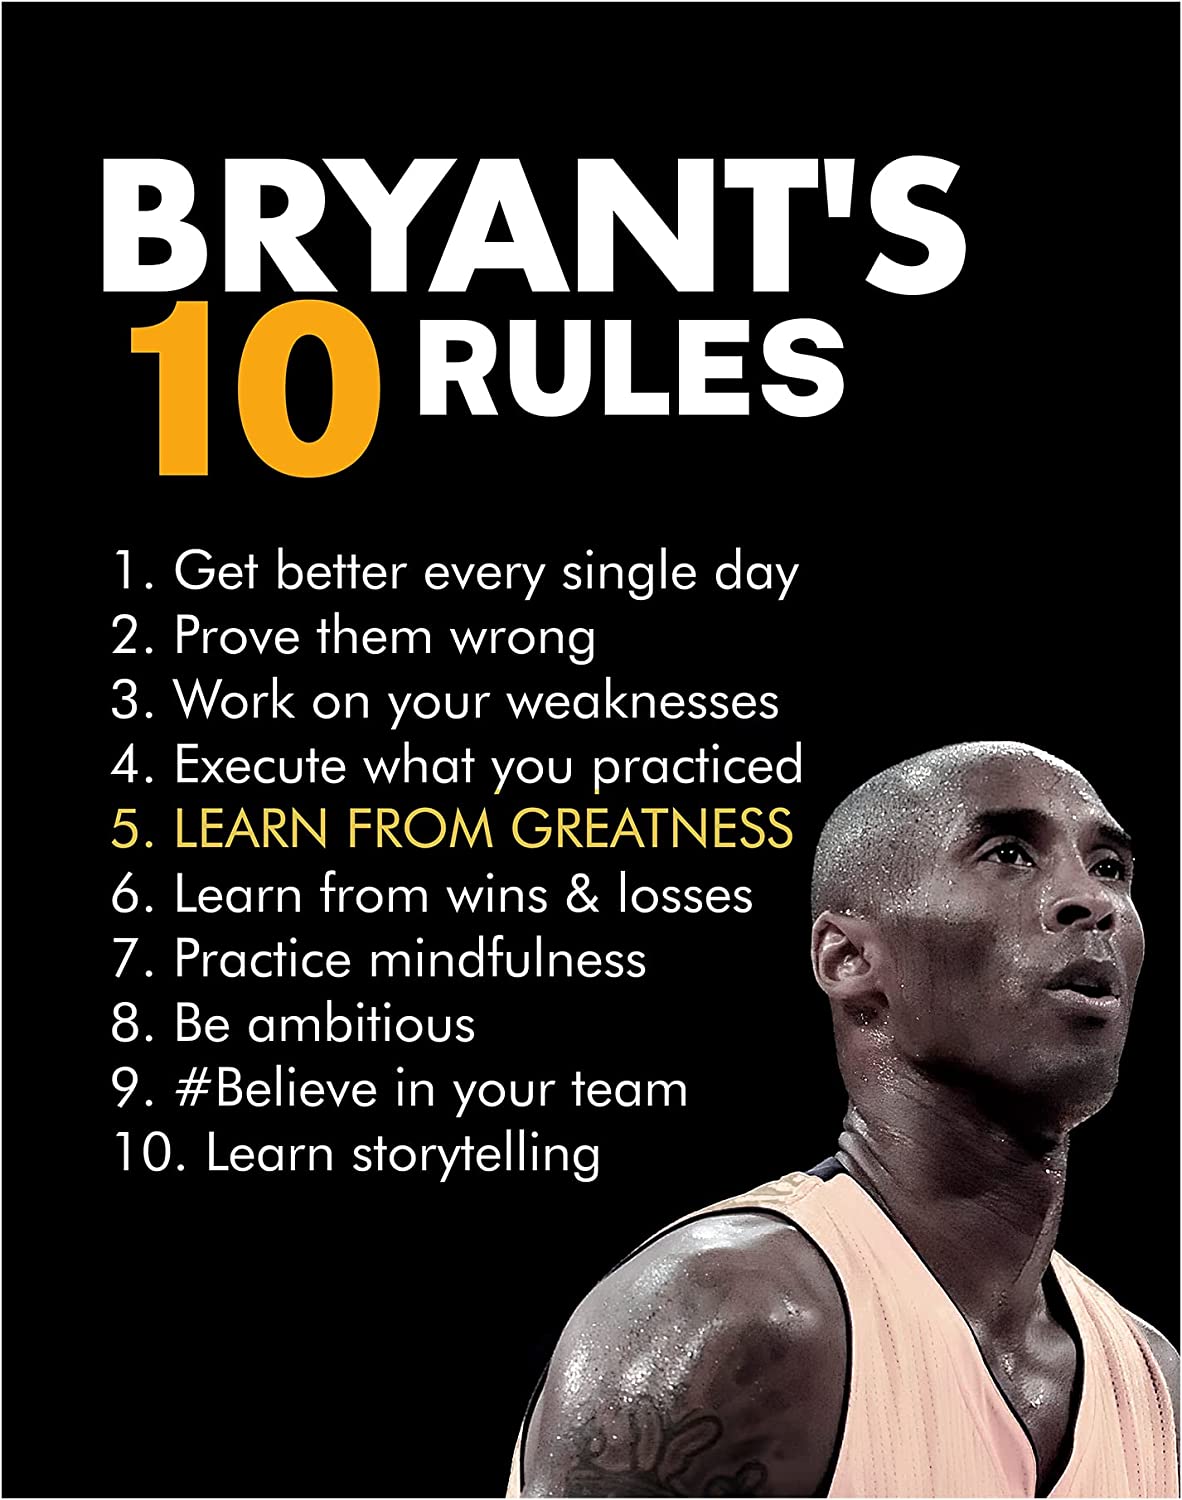 Life Kobe Ten Rules Inspirational Wall Art, Kobe Bryant Poster, Kobe Motivational Quotes, Basketball Poster Decor, Memorabilia Gifts For Boy's Room Bedroom Home Decor Unframed 8x10inch 20x25cm: Posters & Prints